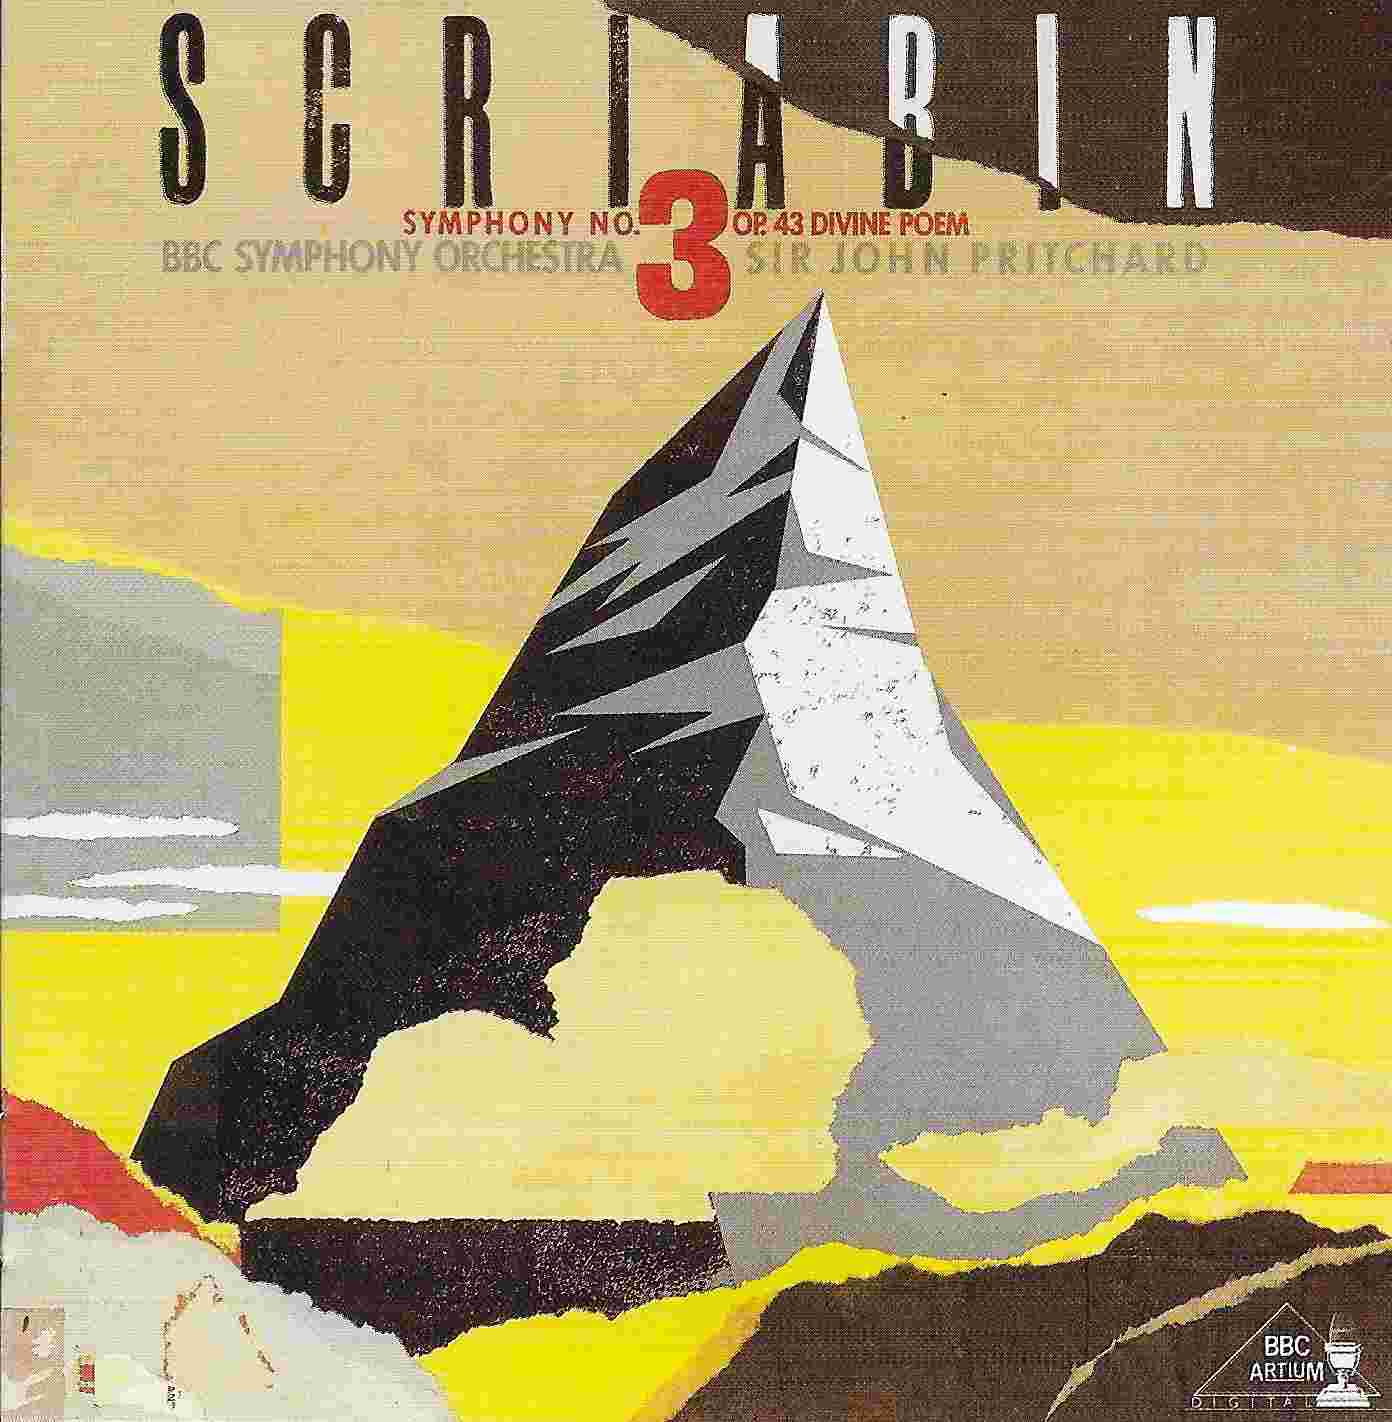 Picture of BBCCD520 Scriabin symphony number 3 by artist Scriabin from the BBC cds - Records and Tapes library